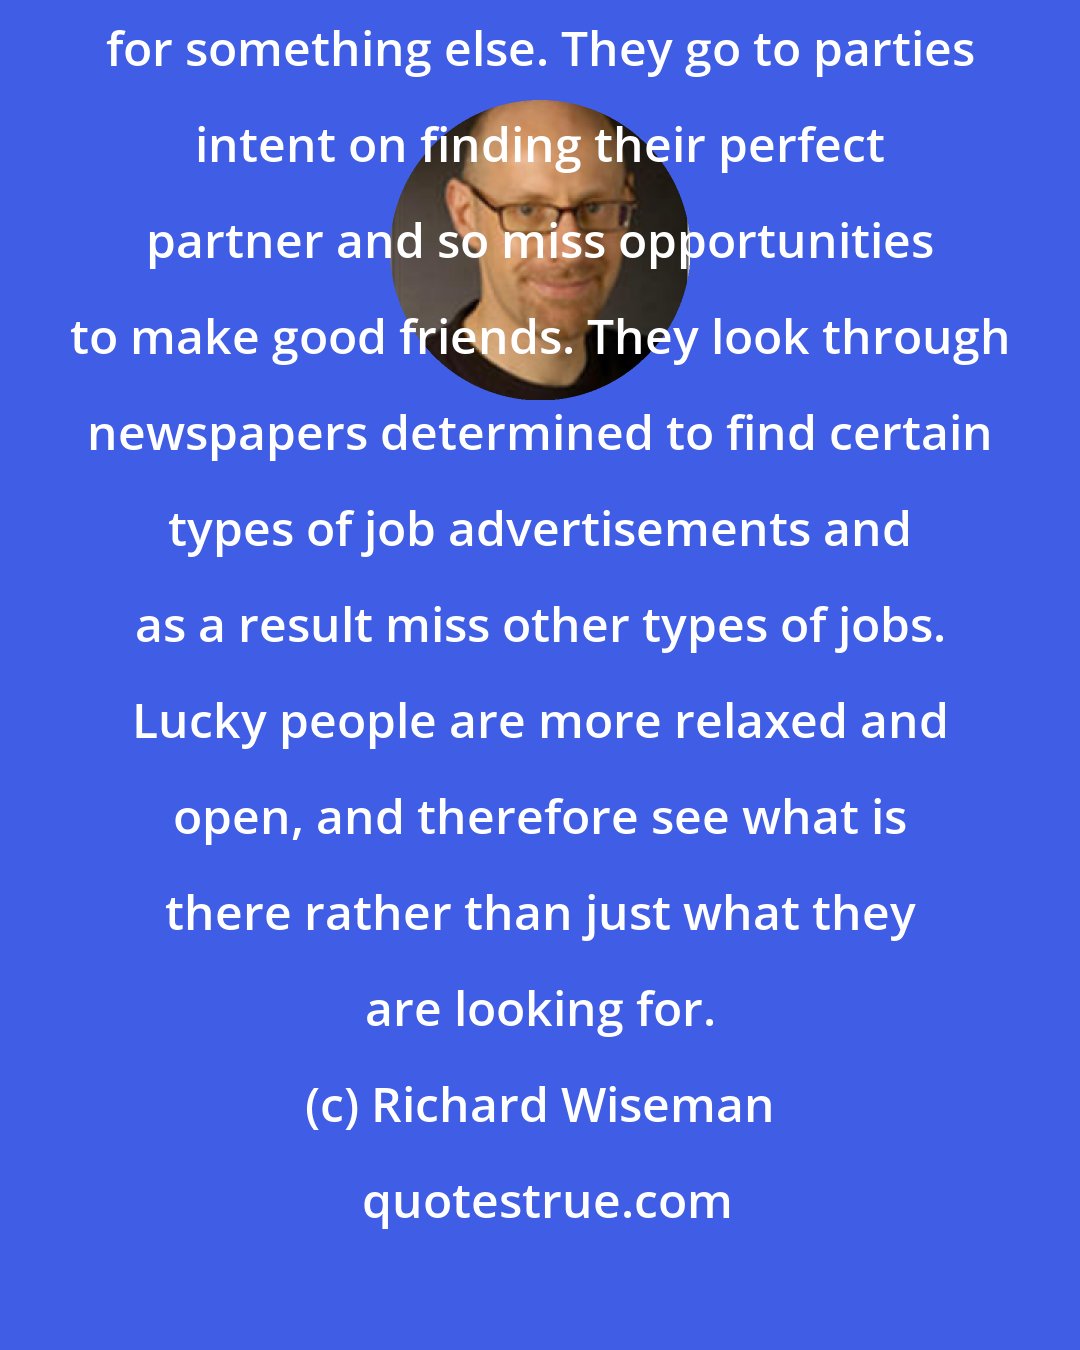 Richard Wiseman: Unlucky people miss chance opportunities because they are too focused on looking for something else. They go to parties intent on finding their perfect partner and so miss opportunities to make good friends. They look through newspapers determined to find certain types of job advertisements and as a result miss other types of jobs. Lucky people are more relaxed and open, and therefore see what is there rather than just what they are looking for.